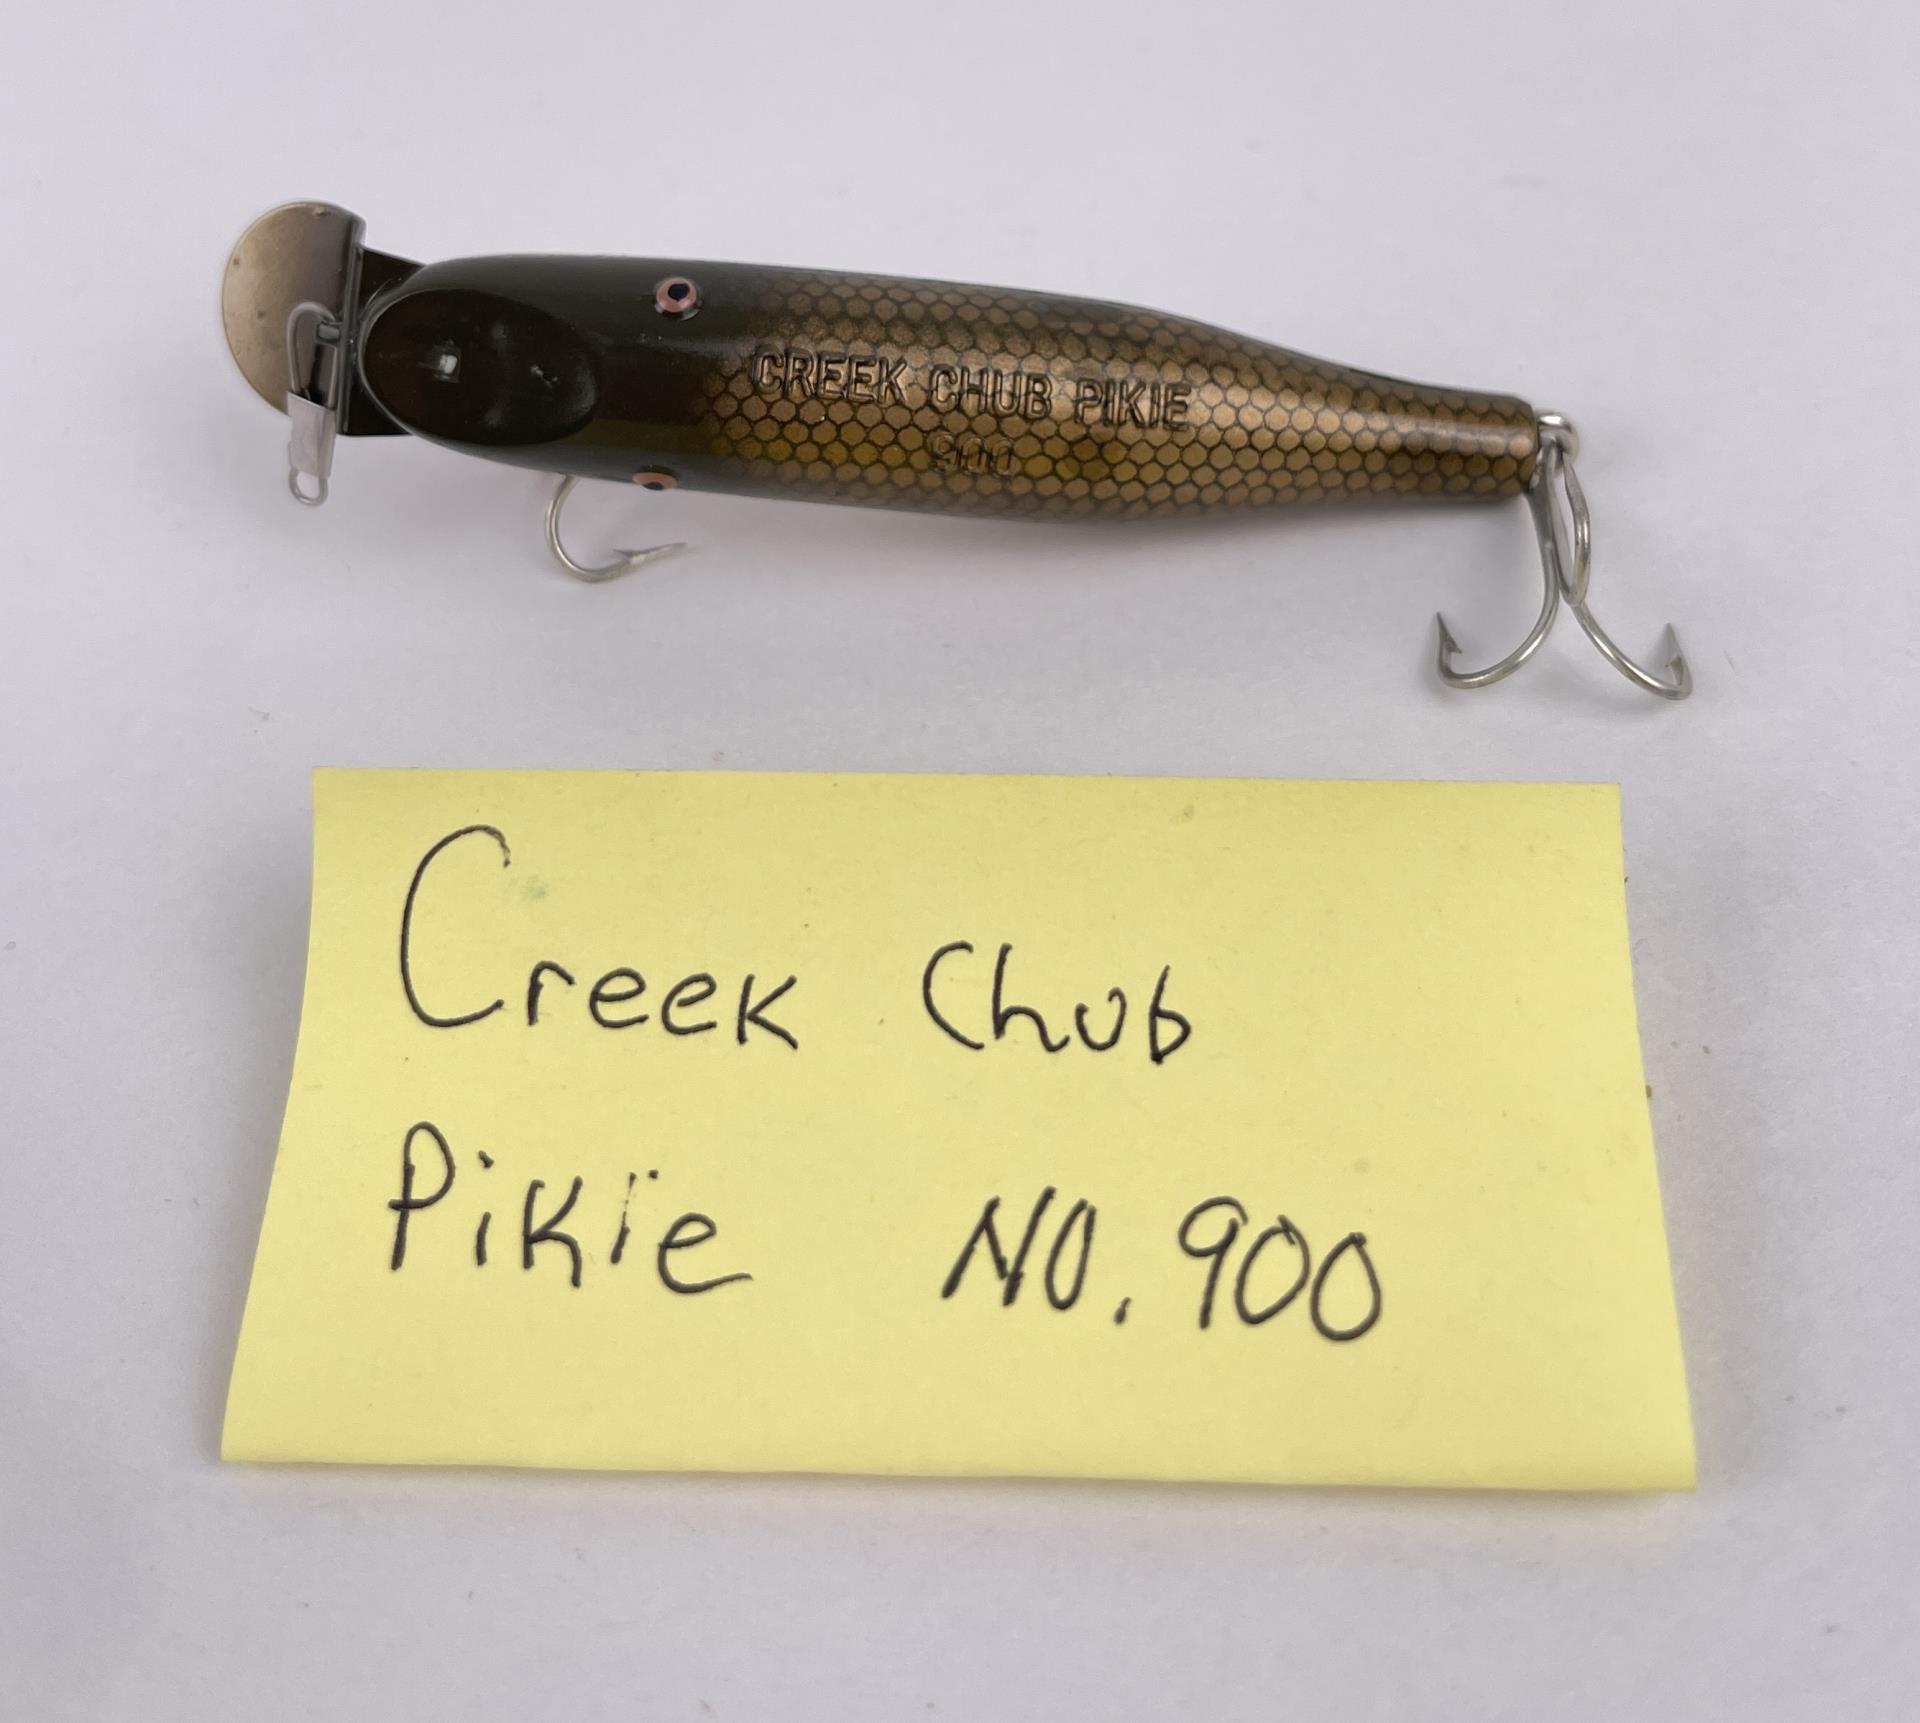 Sold at Auction: Pair of Vintage Creek Chub Wiggle Lures Pikie